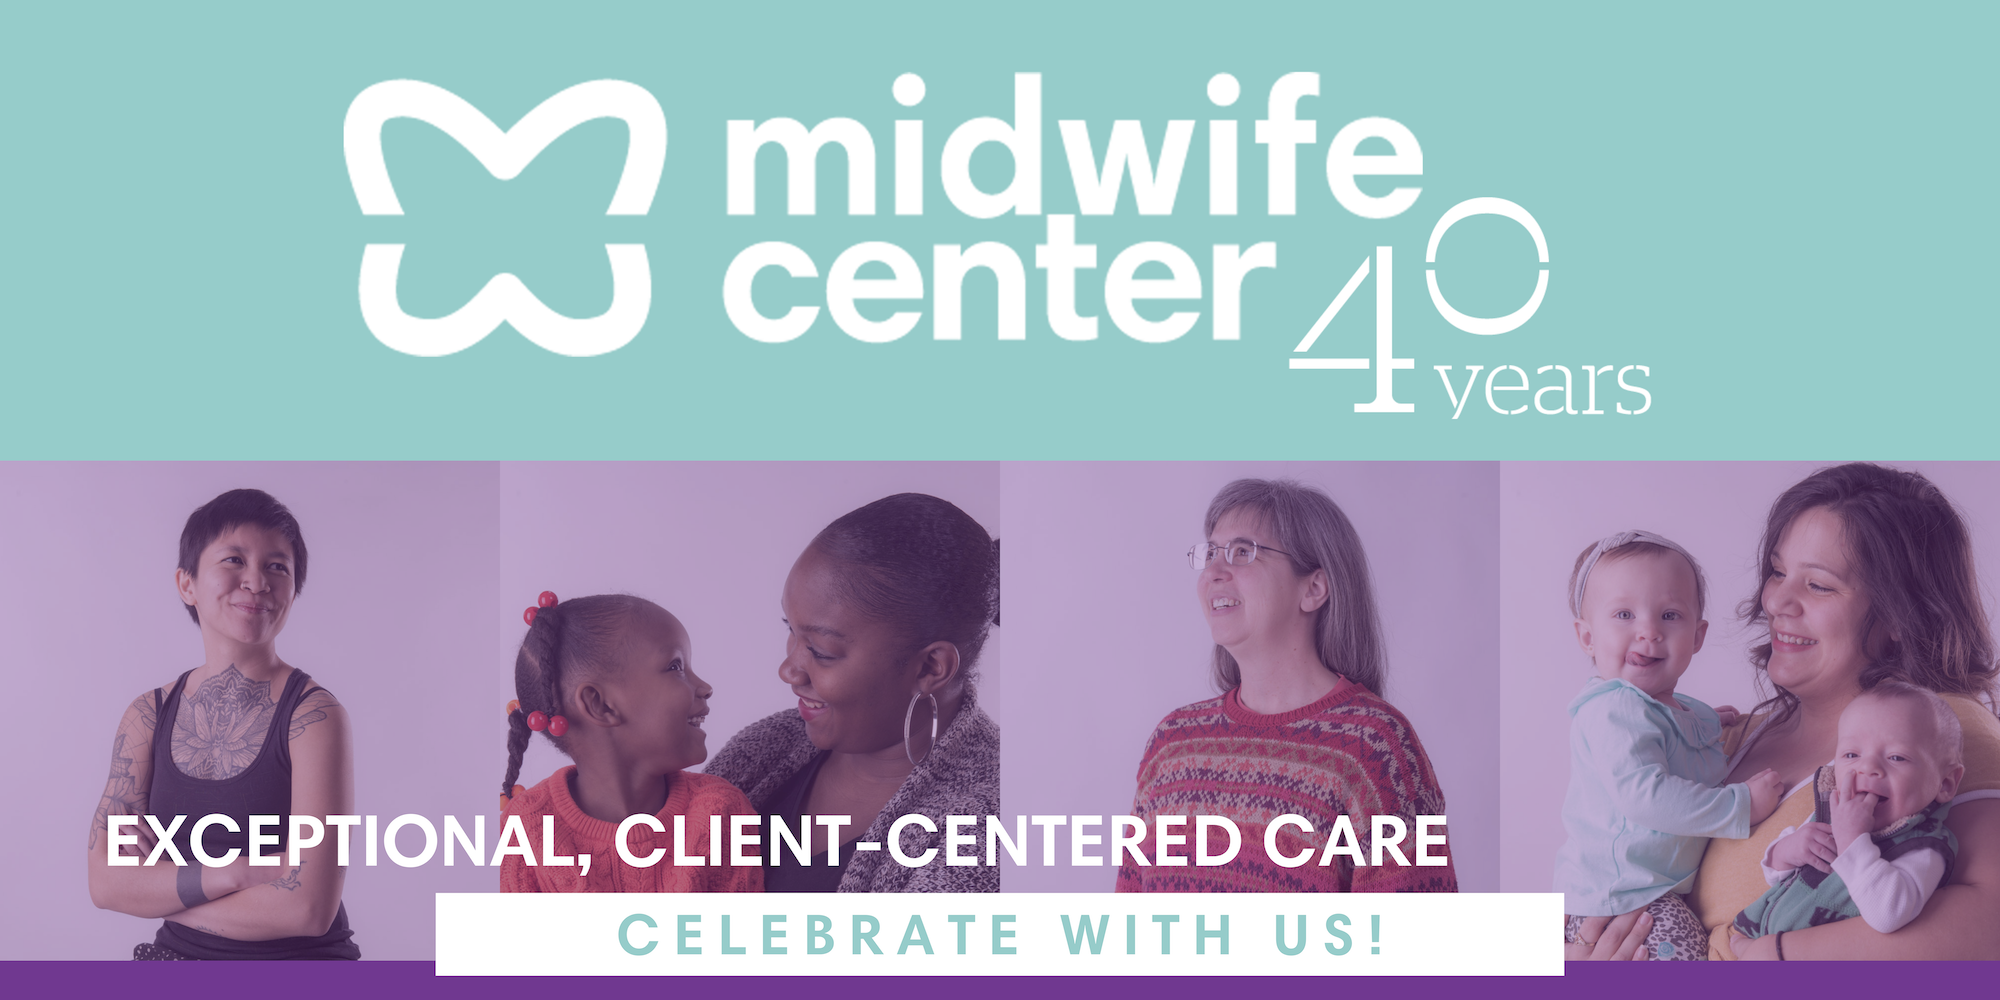 The top of the image has The Midwife Center logo followed by 40 years. Below that, there are 4 side-by-side images of smiling people. Text overlays the images that reads "Exceptional, Client-Centered Care." Below that, it reads "Celebrate with us!"